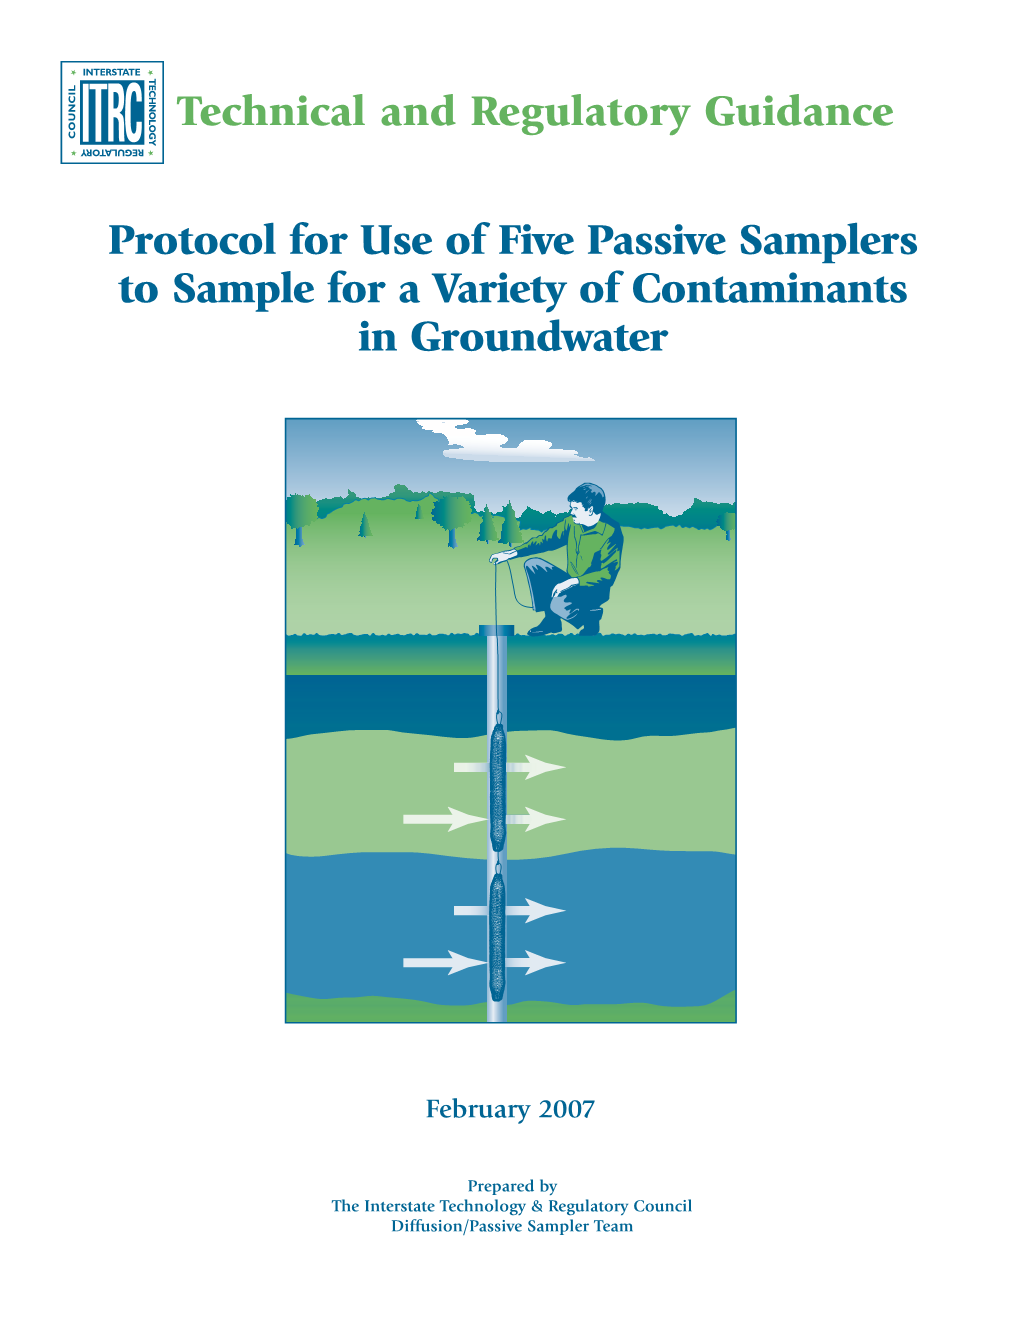 Protocol for Use of Five Passive Samplers to Sample for a Variety of Contaminants in Groundwater